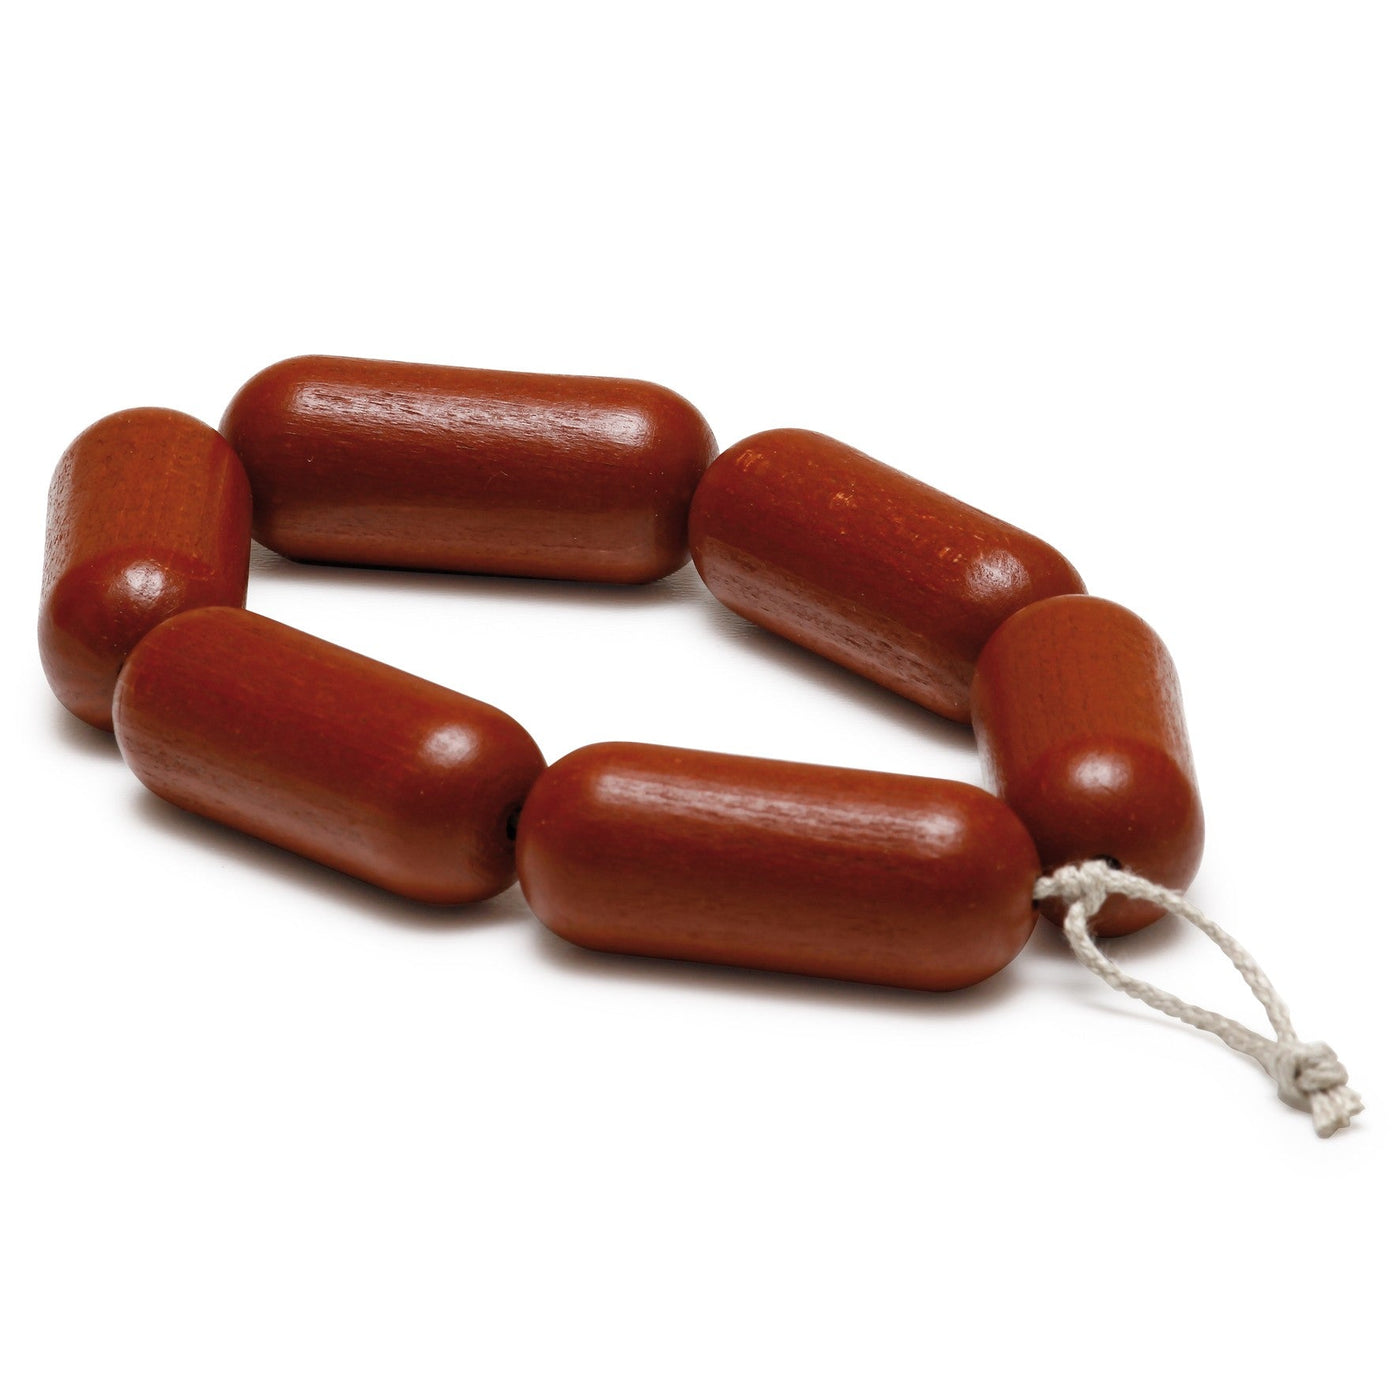 Erzi Sausages on Cord - Wooden Play Food